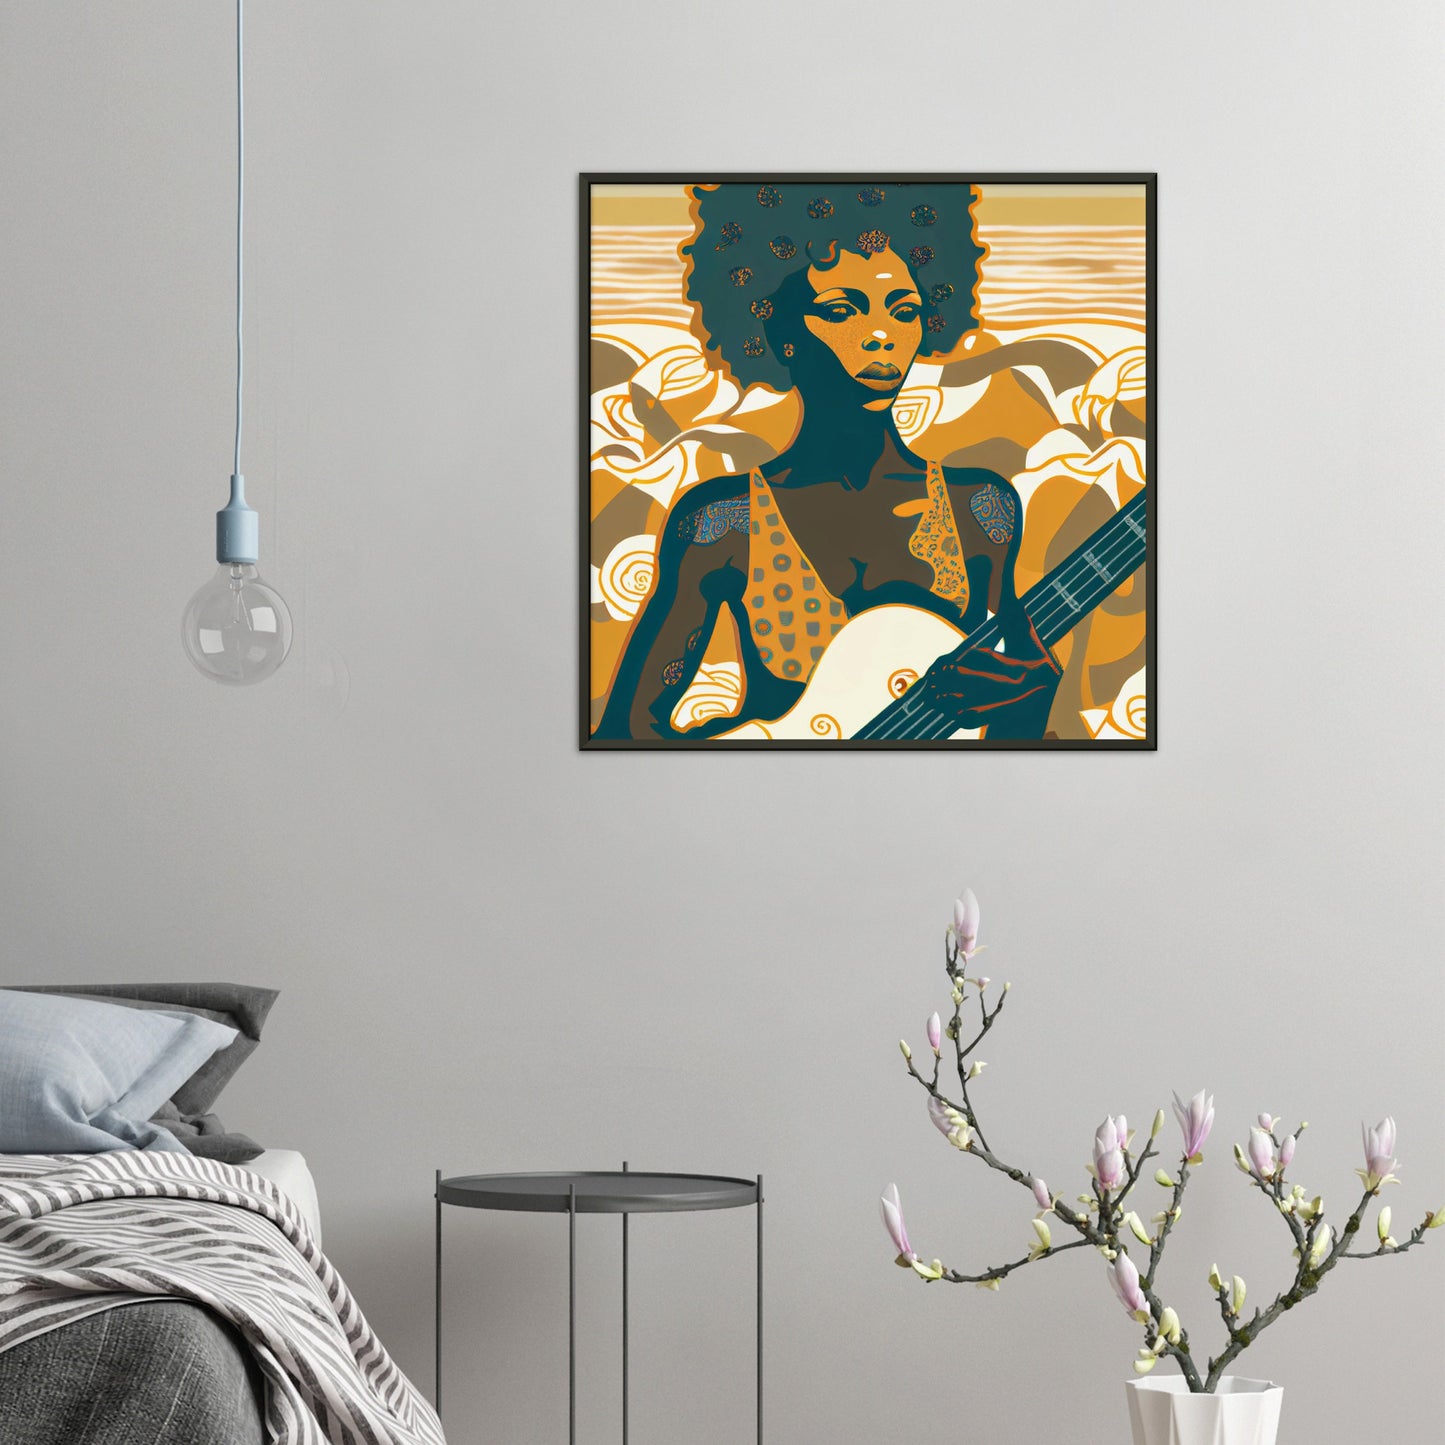 Vampire Art Girl Playing the Guitar by the Sea - Premium Matte Paper Metal Framed Poster - 70x70cm (28x28inch)